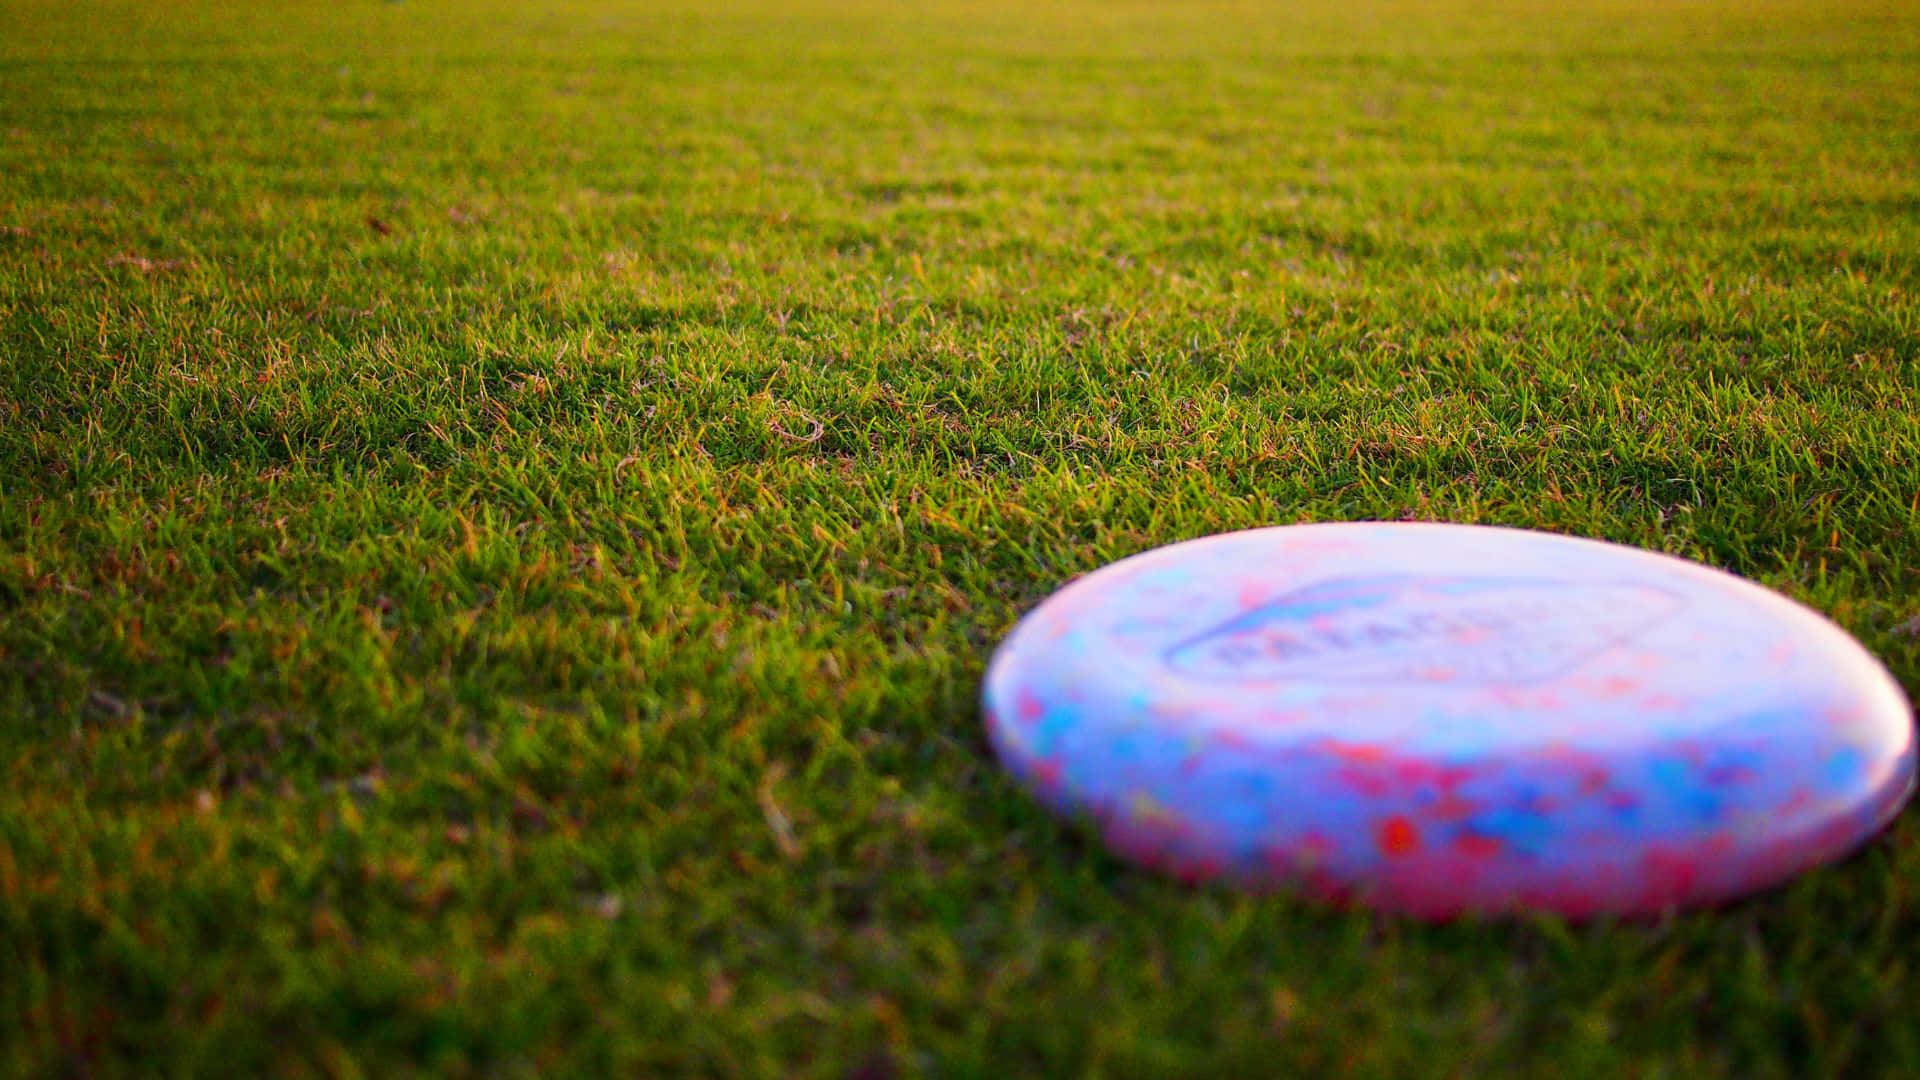 A Frisbee Is Sitting On The Grass